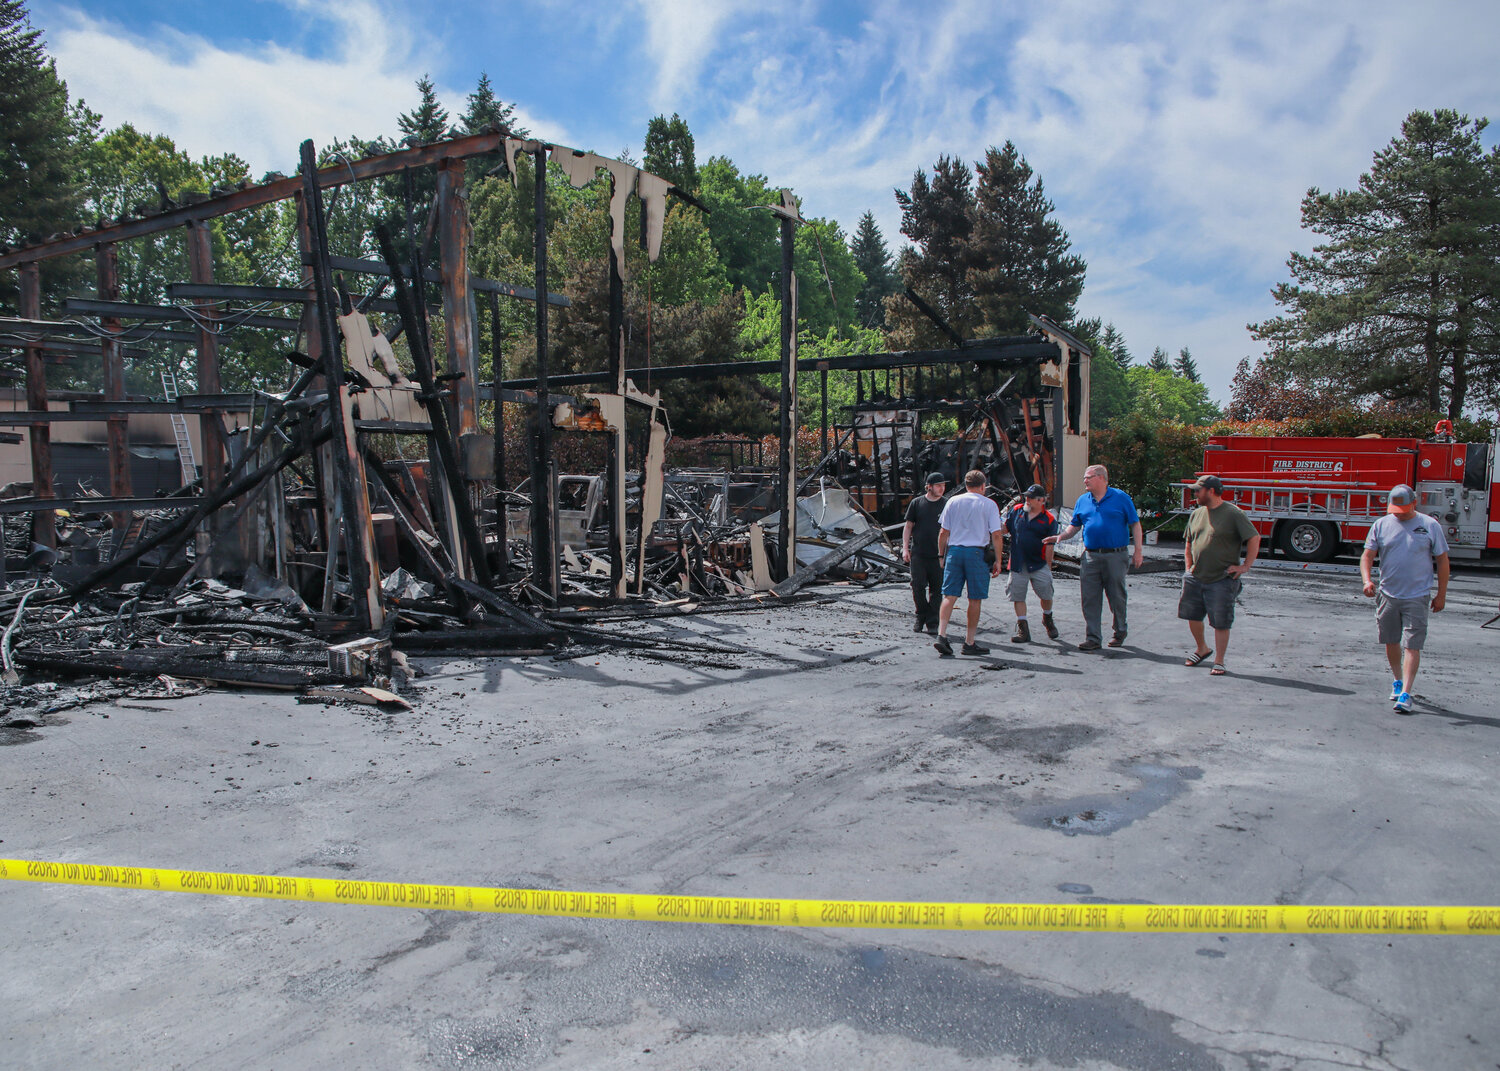 Fire crews and investigators remained on scene on Wednesday, June 7, as business owners and employees walked around the scene of the two-alarm industrial building fire in Salmon Creek.